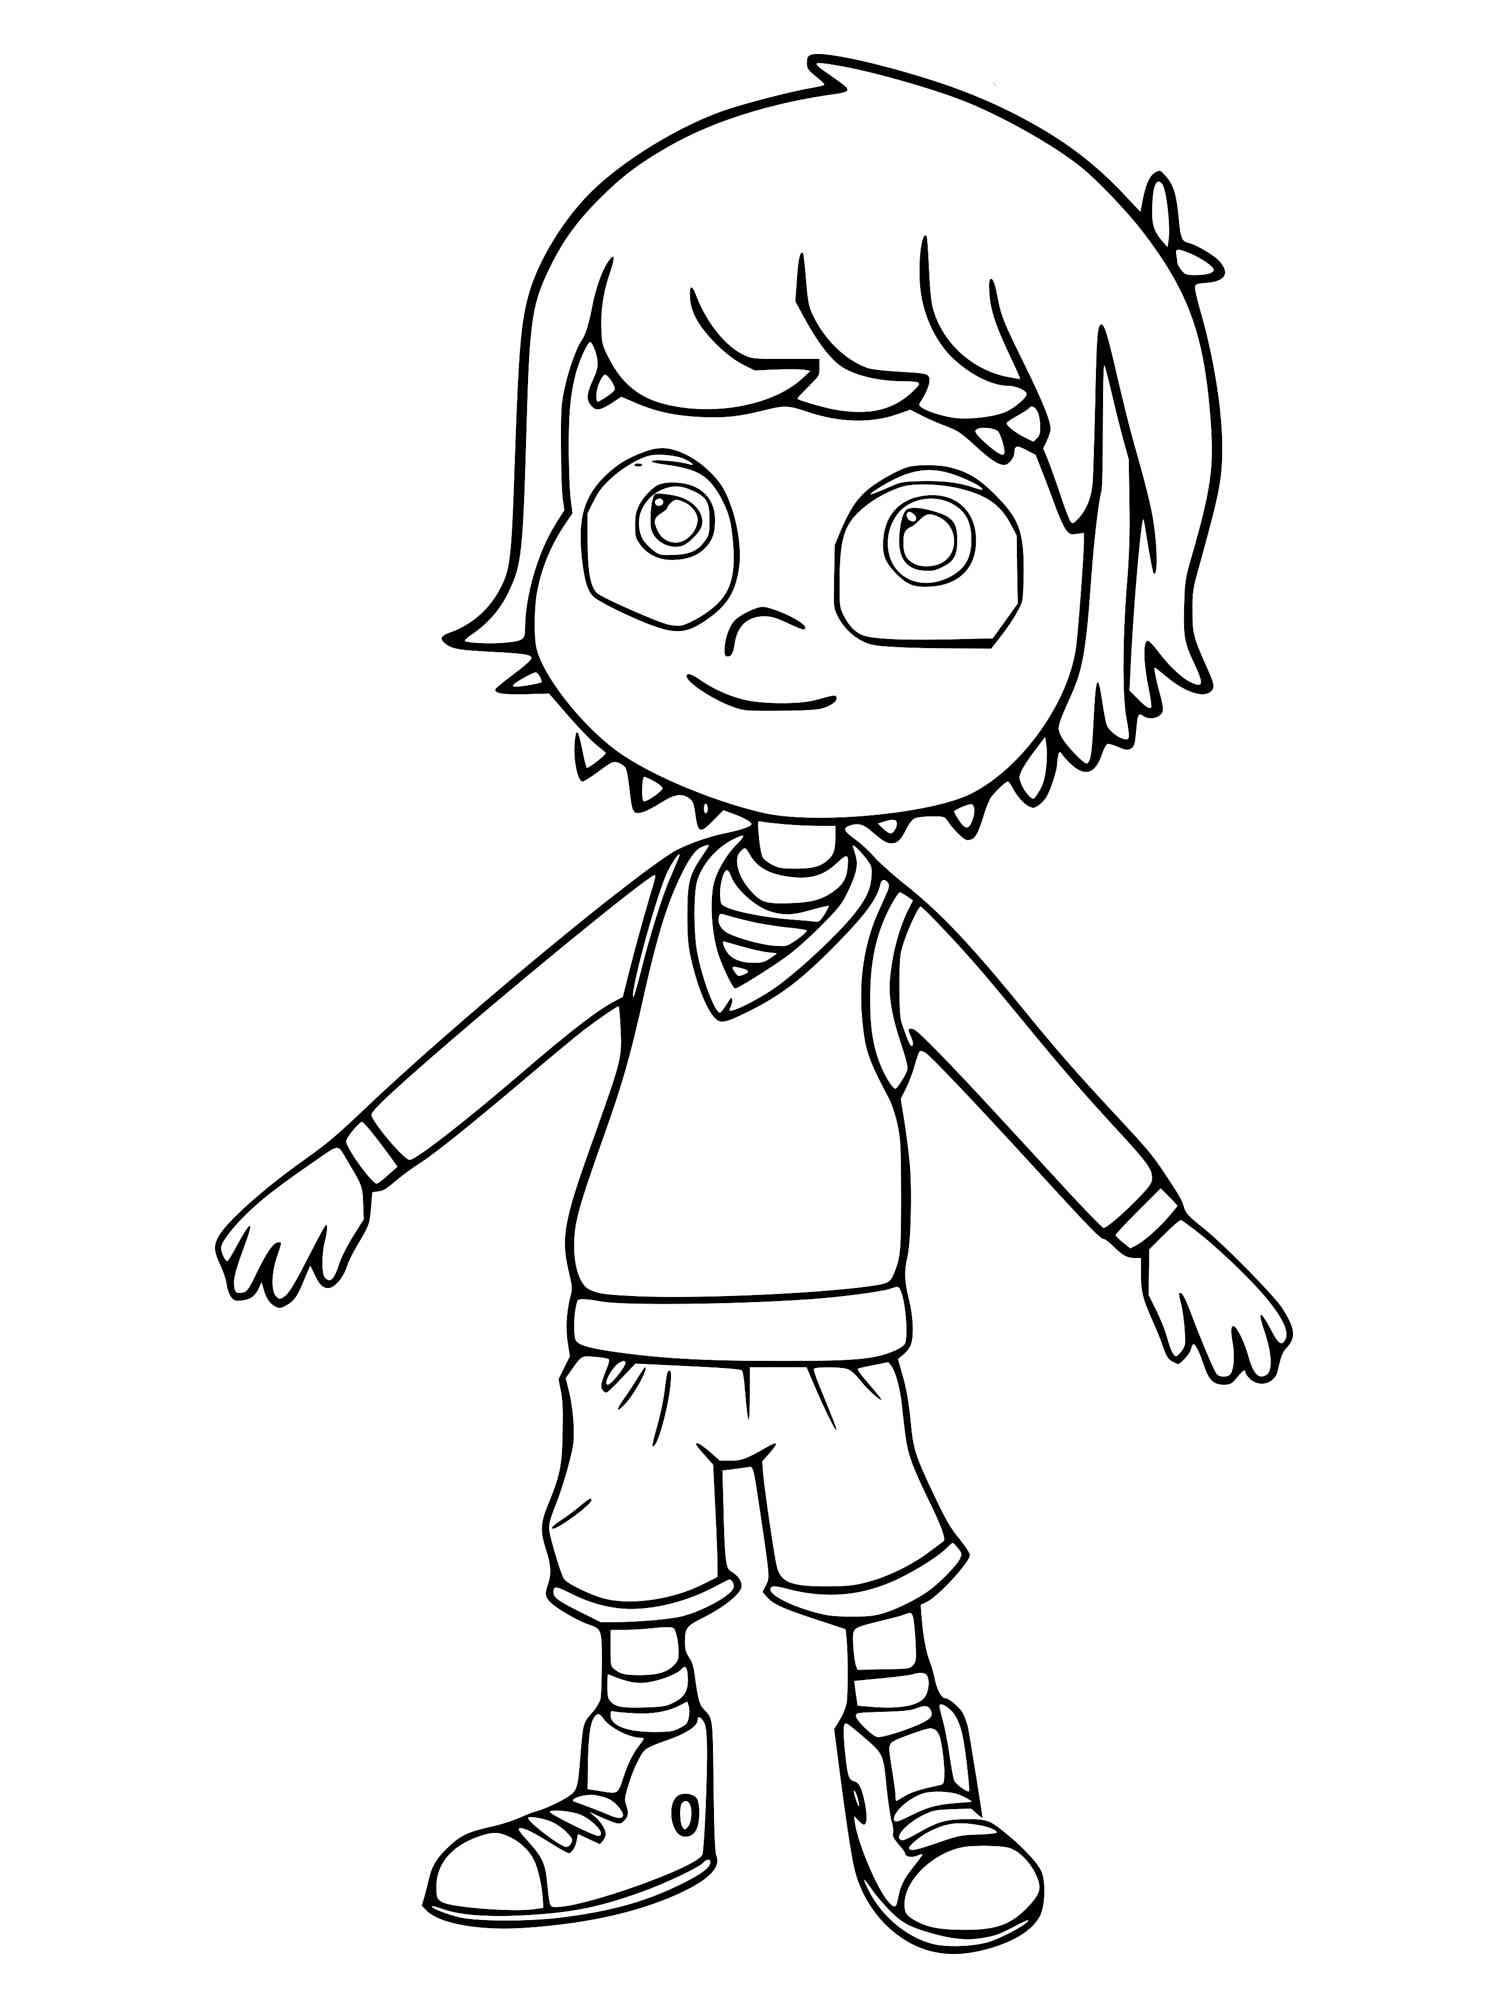 Kazoops! coloring pages